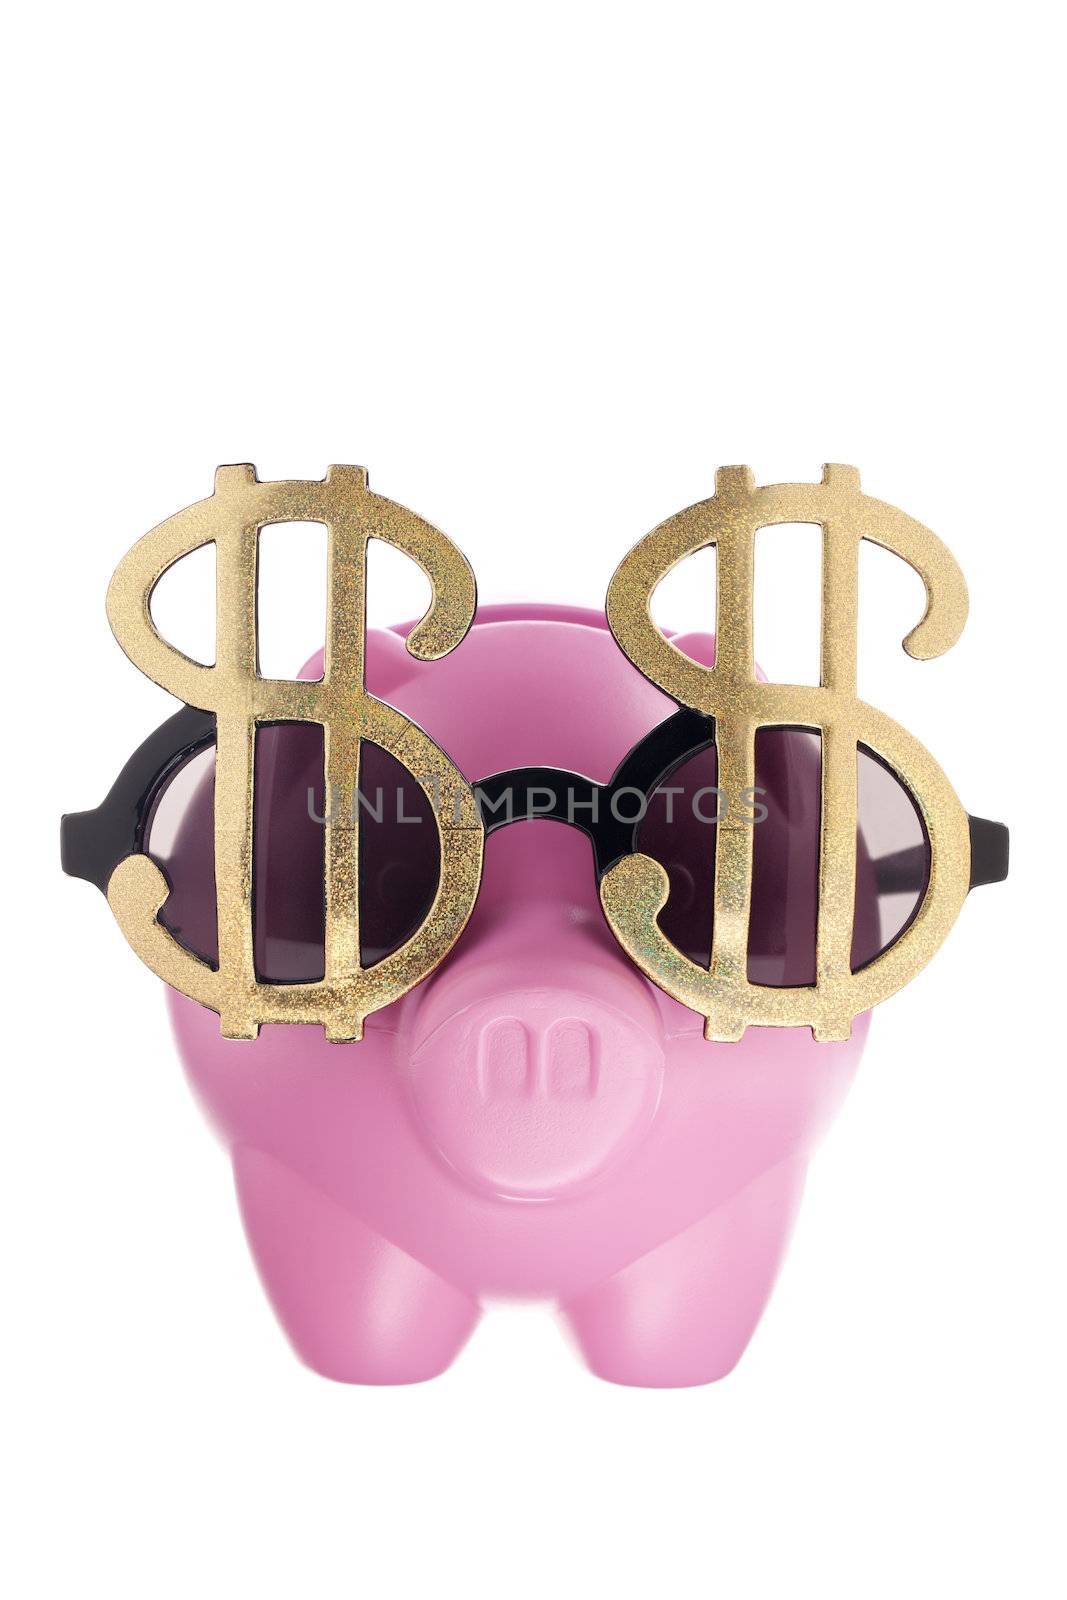 Dollar glasses and piggy bank in a white background